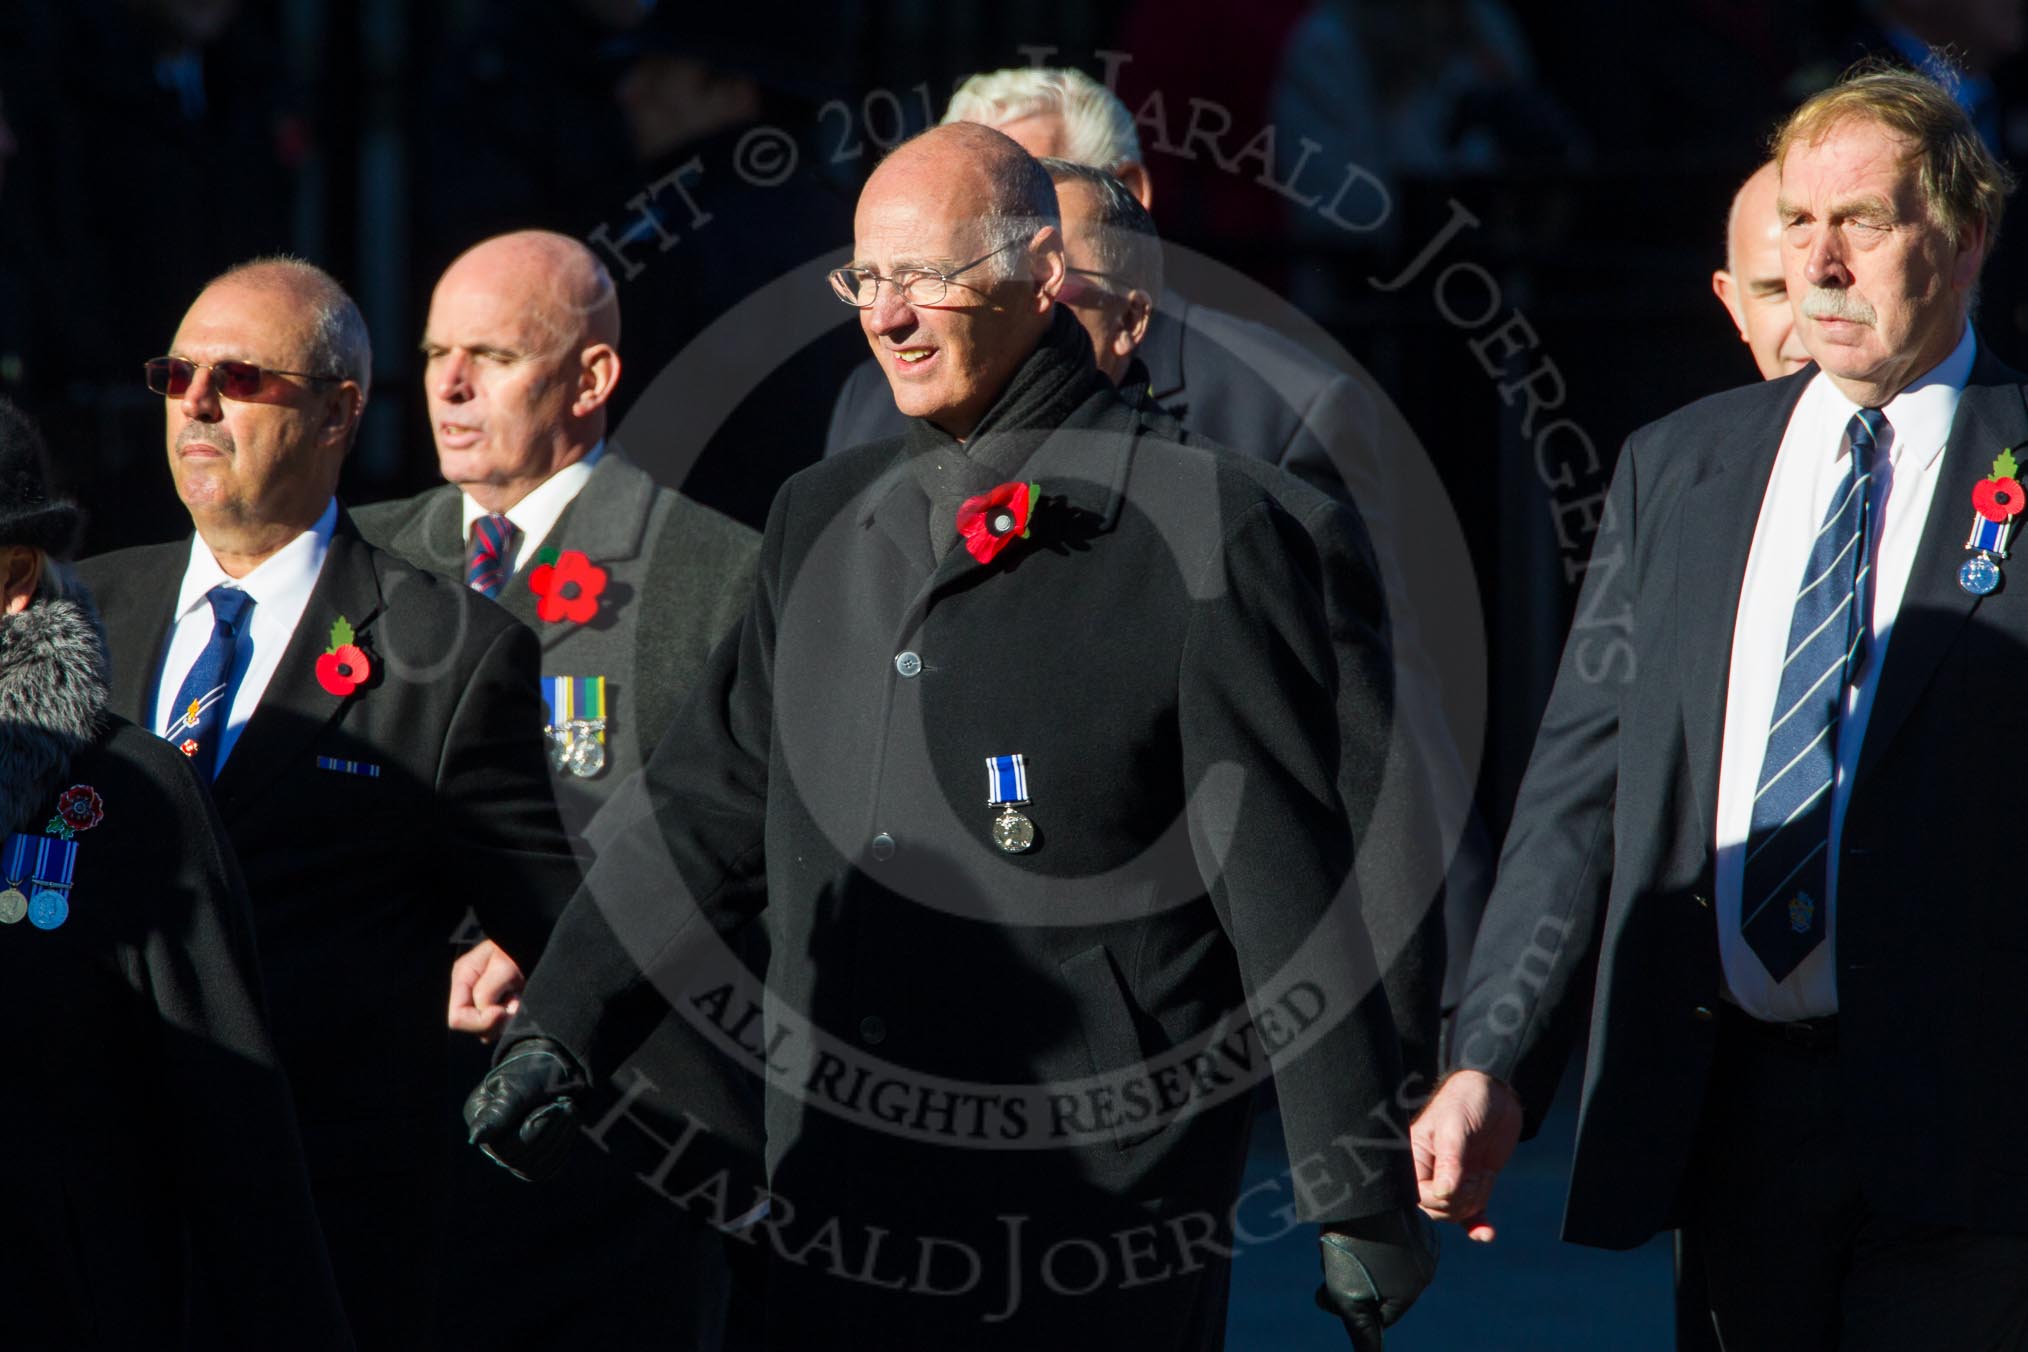 Remembrance Sunday Cenotaph March Past 2013: M12 - National Association of Retired Police Officers..
Press stand opposite the Foreign Office building, Whitehall, London SW1,
London,
Greater London,
United Kingdom,
on 10 November 2013 at 12:10, image #1952